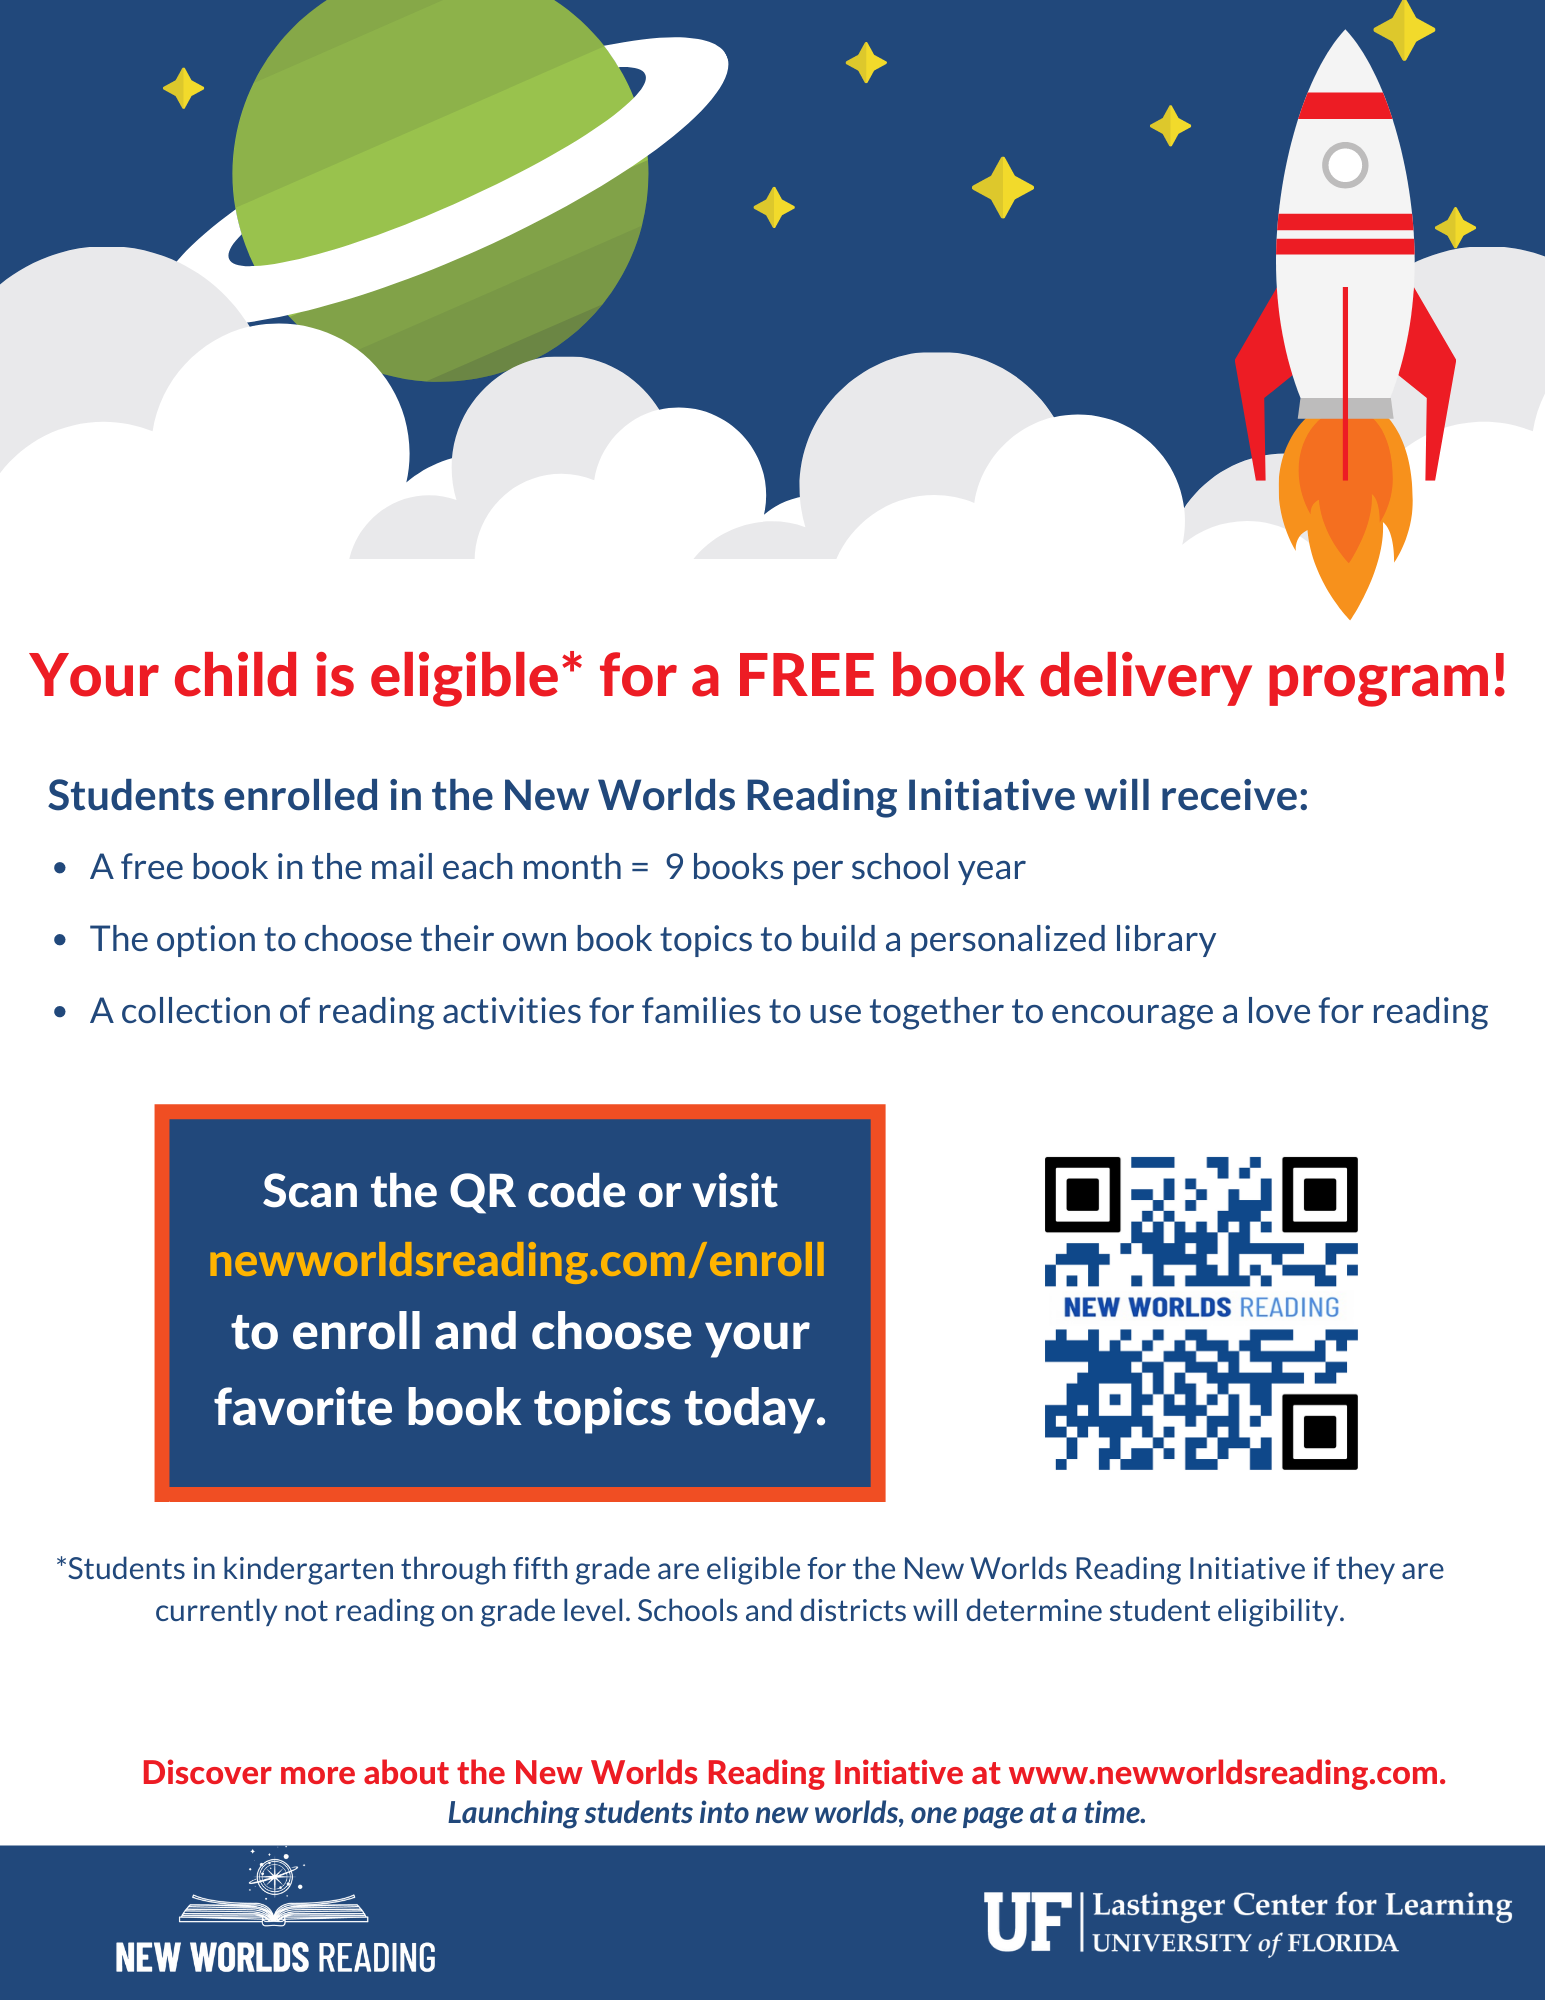 Students are Eligible for Free Books 